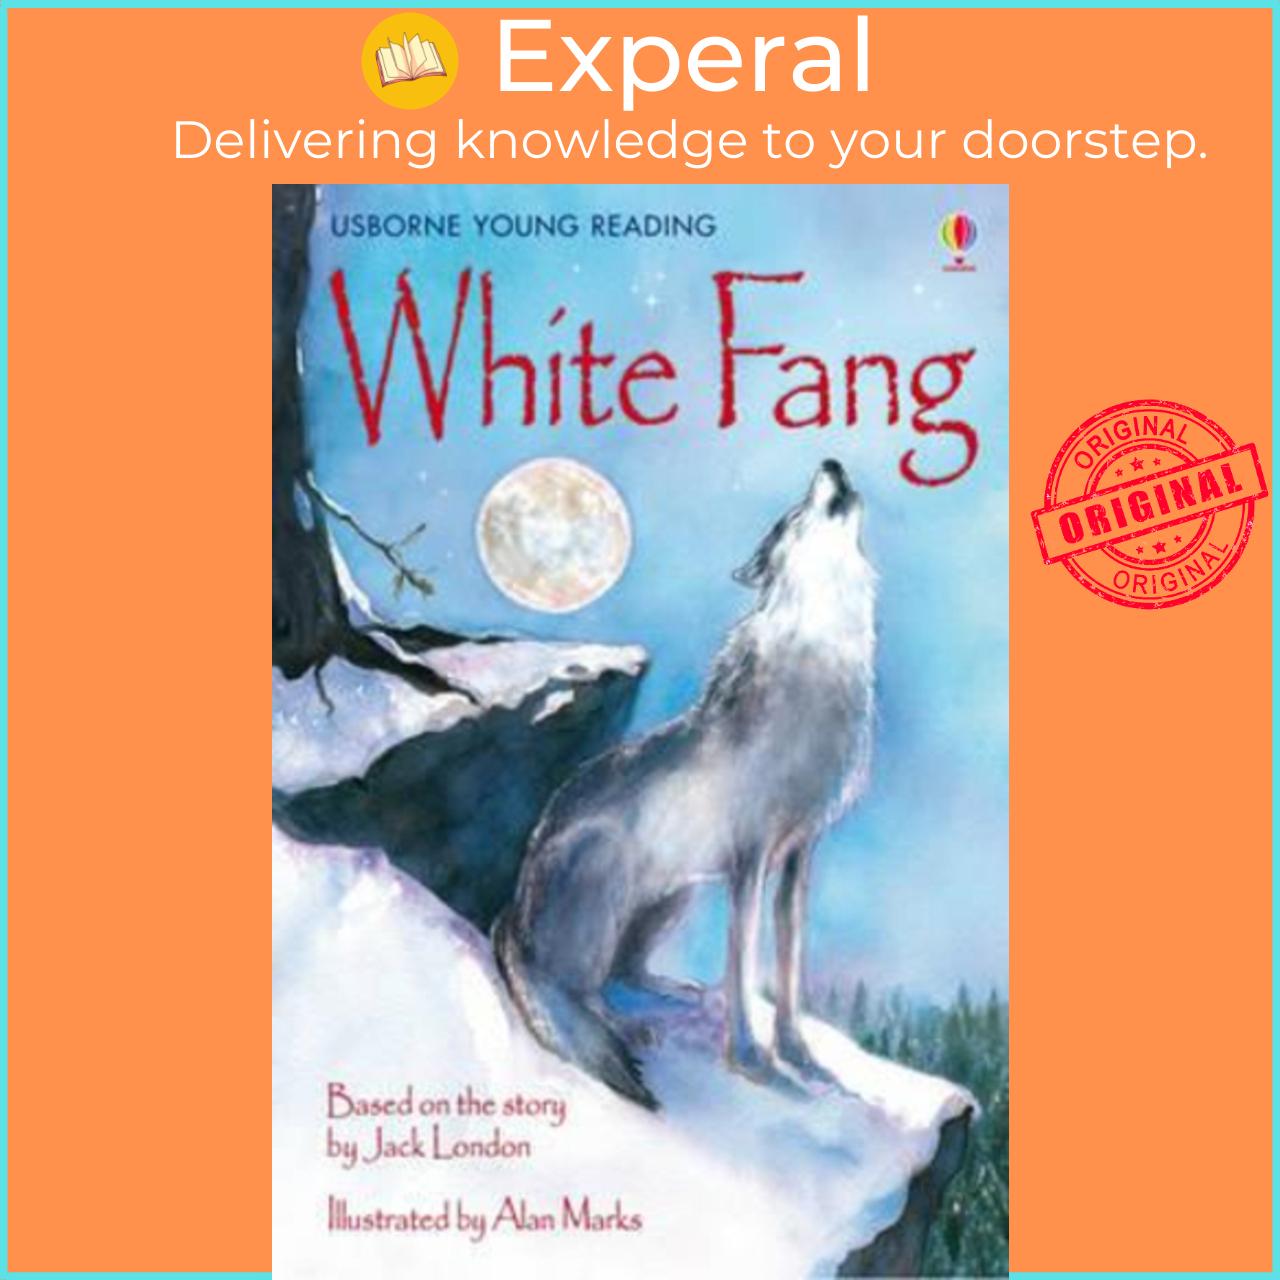 Sách - White Fang by Sarah Courtauld (UK edition, hardcover)